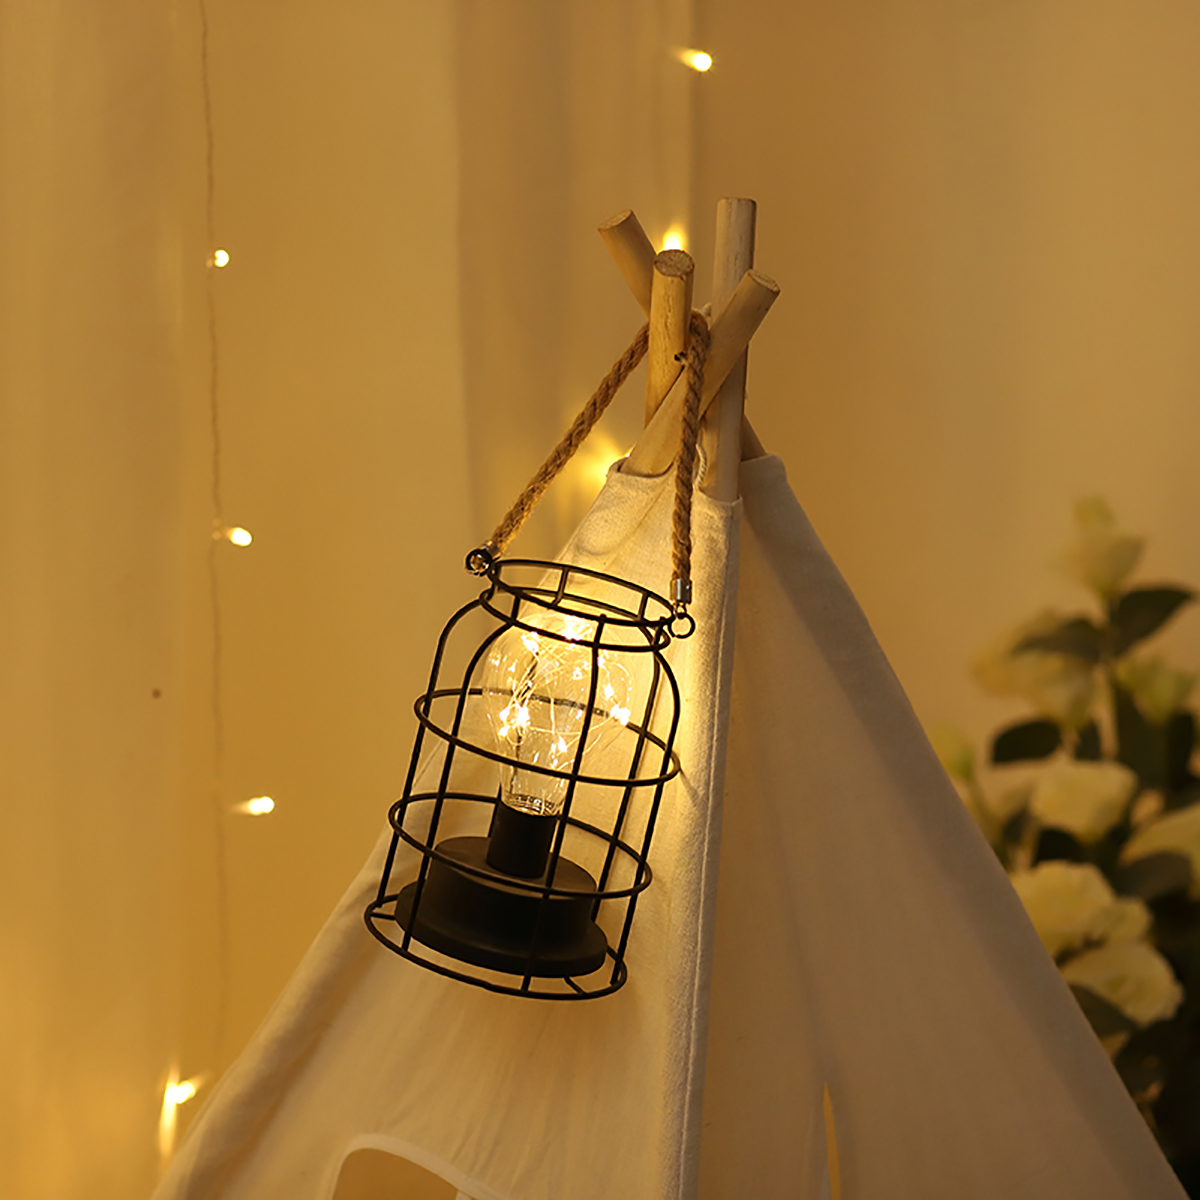 Retro-Cage-Light-Mini-Metal-Battery-Powered-LED-Bulb-Lamp-for-Living-Room-Bedroom-Kitchen-Wedding-Ch-1733946-4